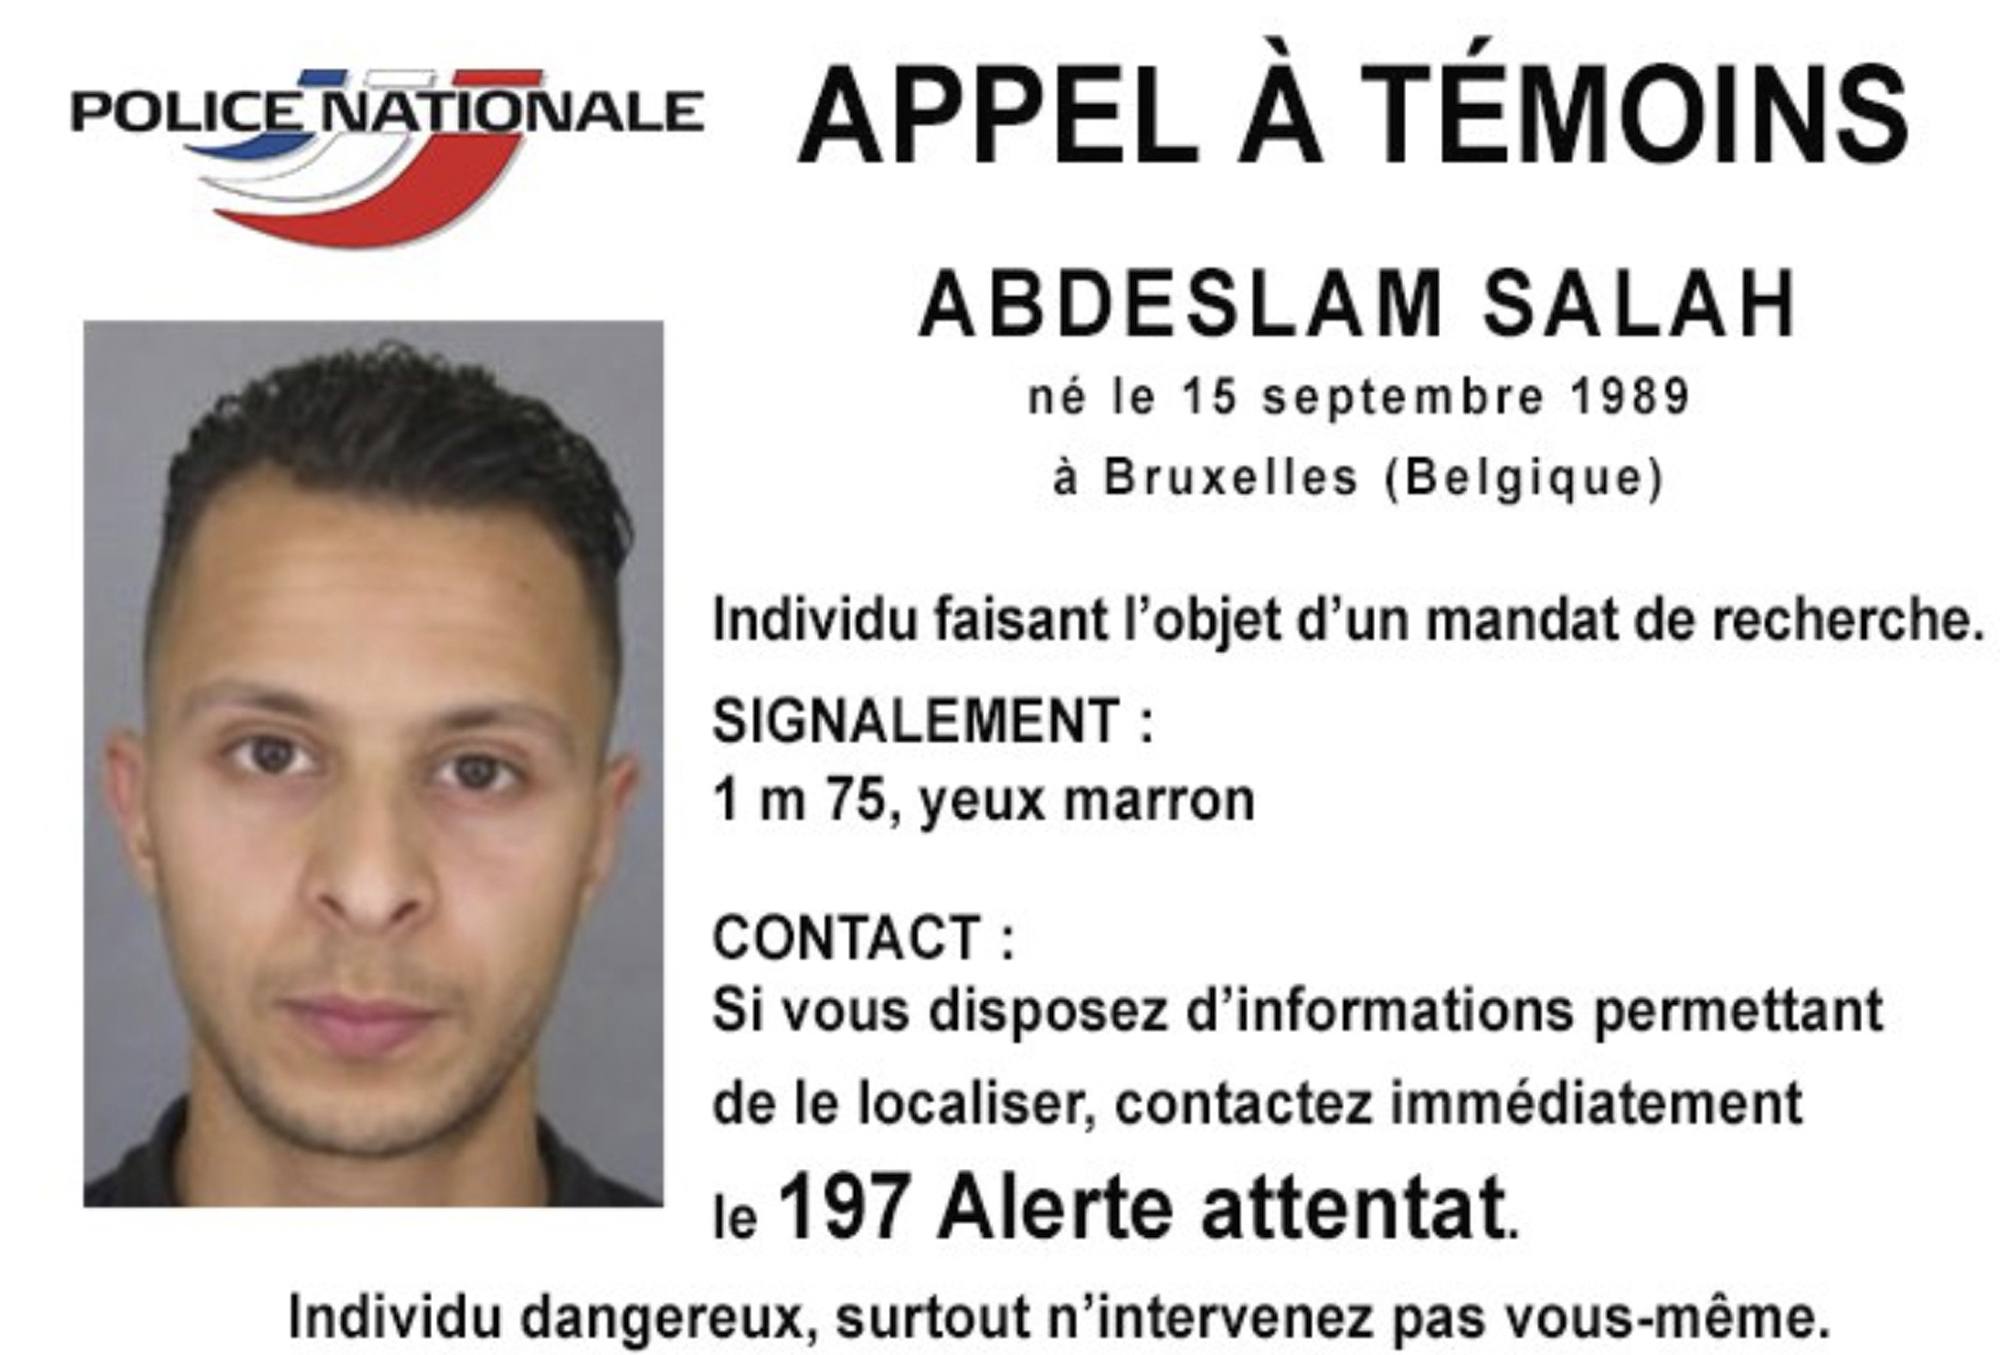 A French police photo of 26-year old Salah Abdeslam who is wanted by police in connection with terror attacks in Paris.